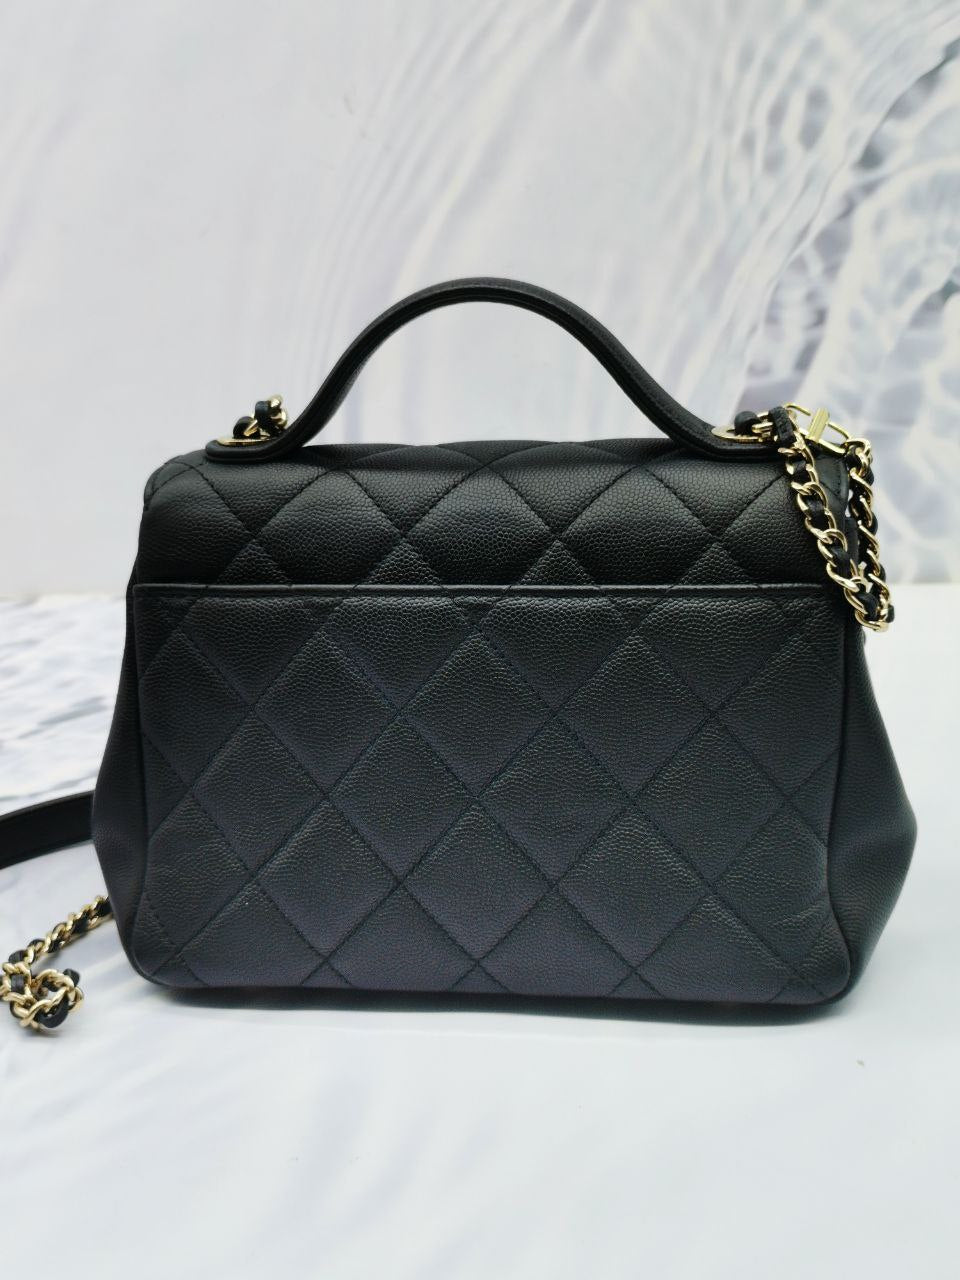 Chanel Small Business Affinity Bag  -full Set-